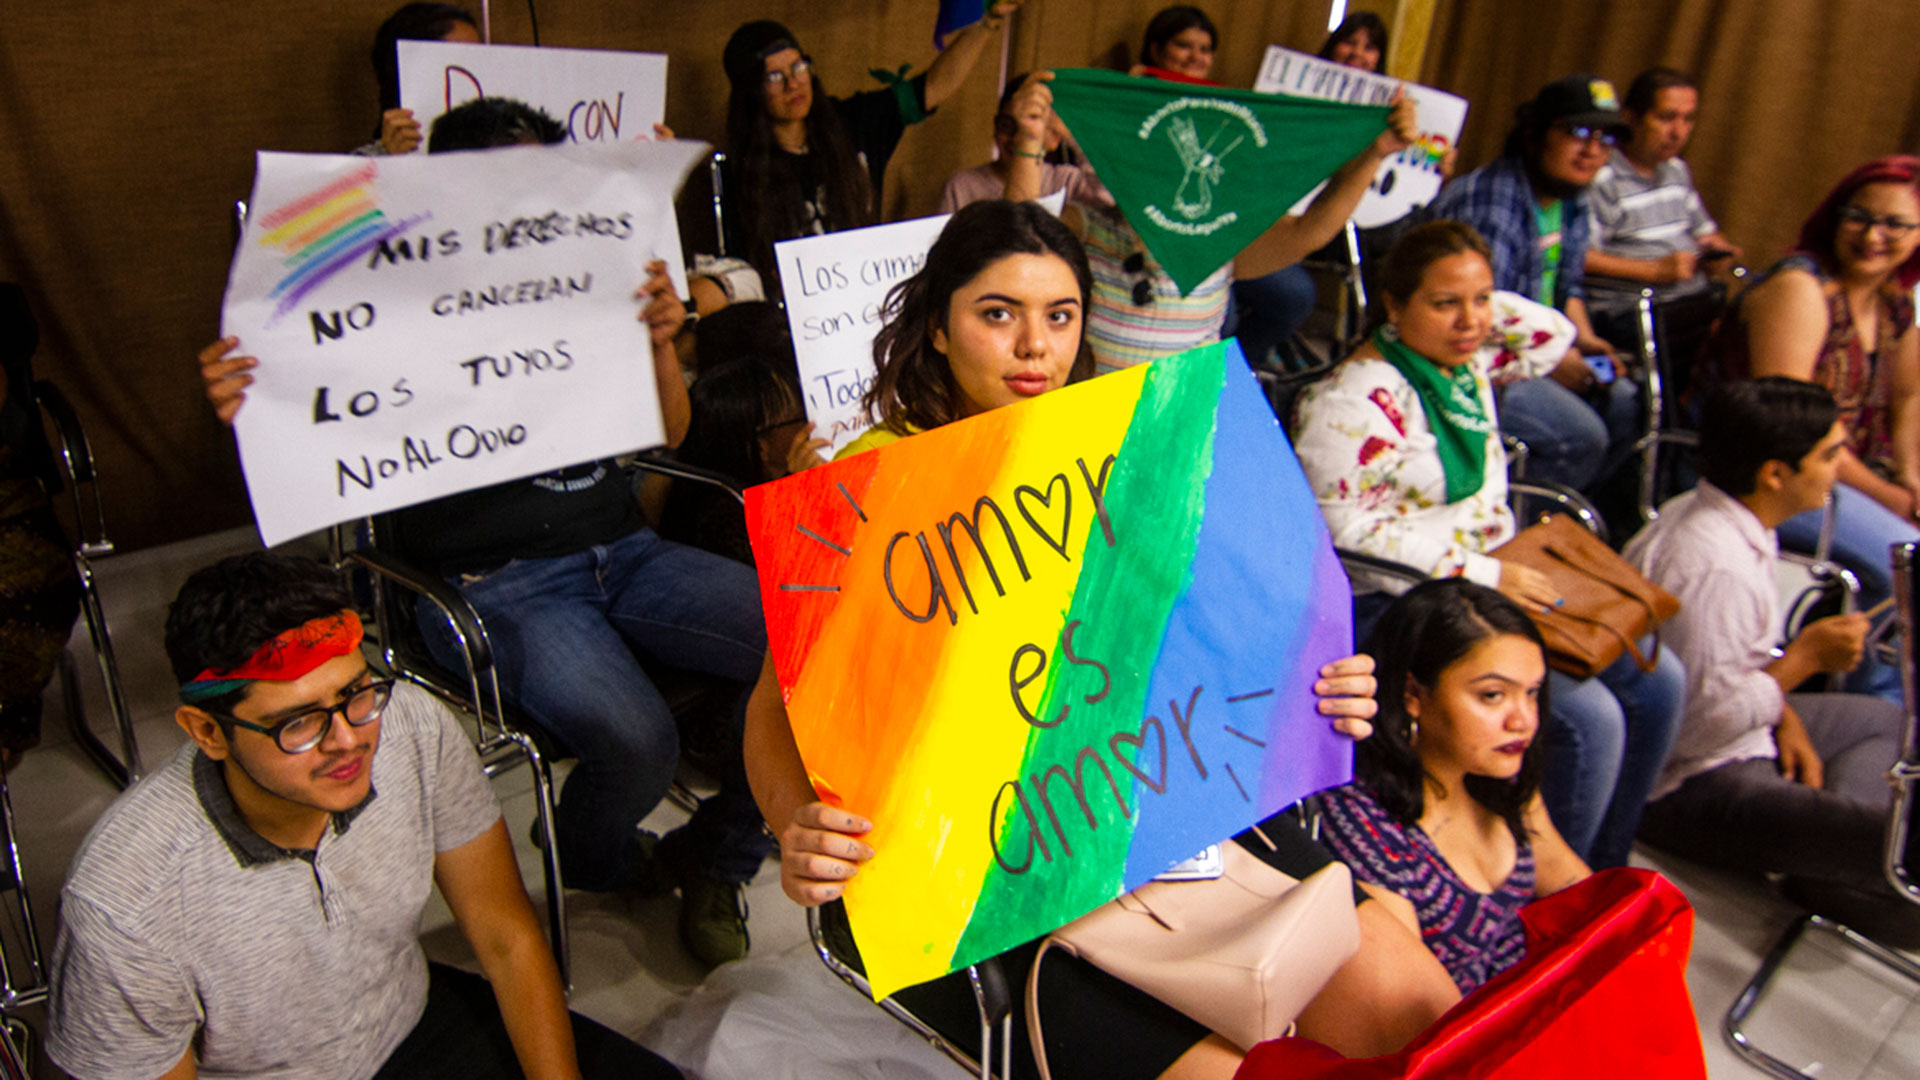 Dozens of supporters at a hearing presenting a marriage equality reform measure in Hermosillo, Sonora. The sign in the center reads, "Love is love."